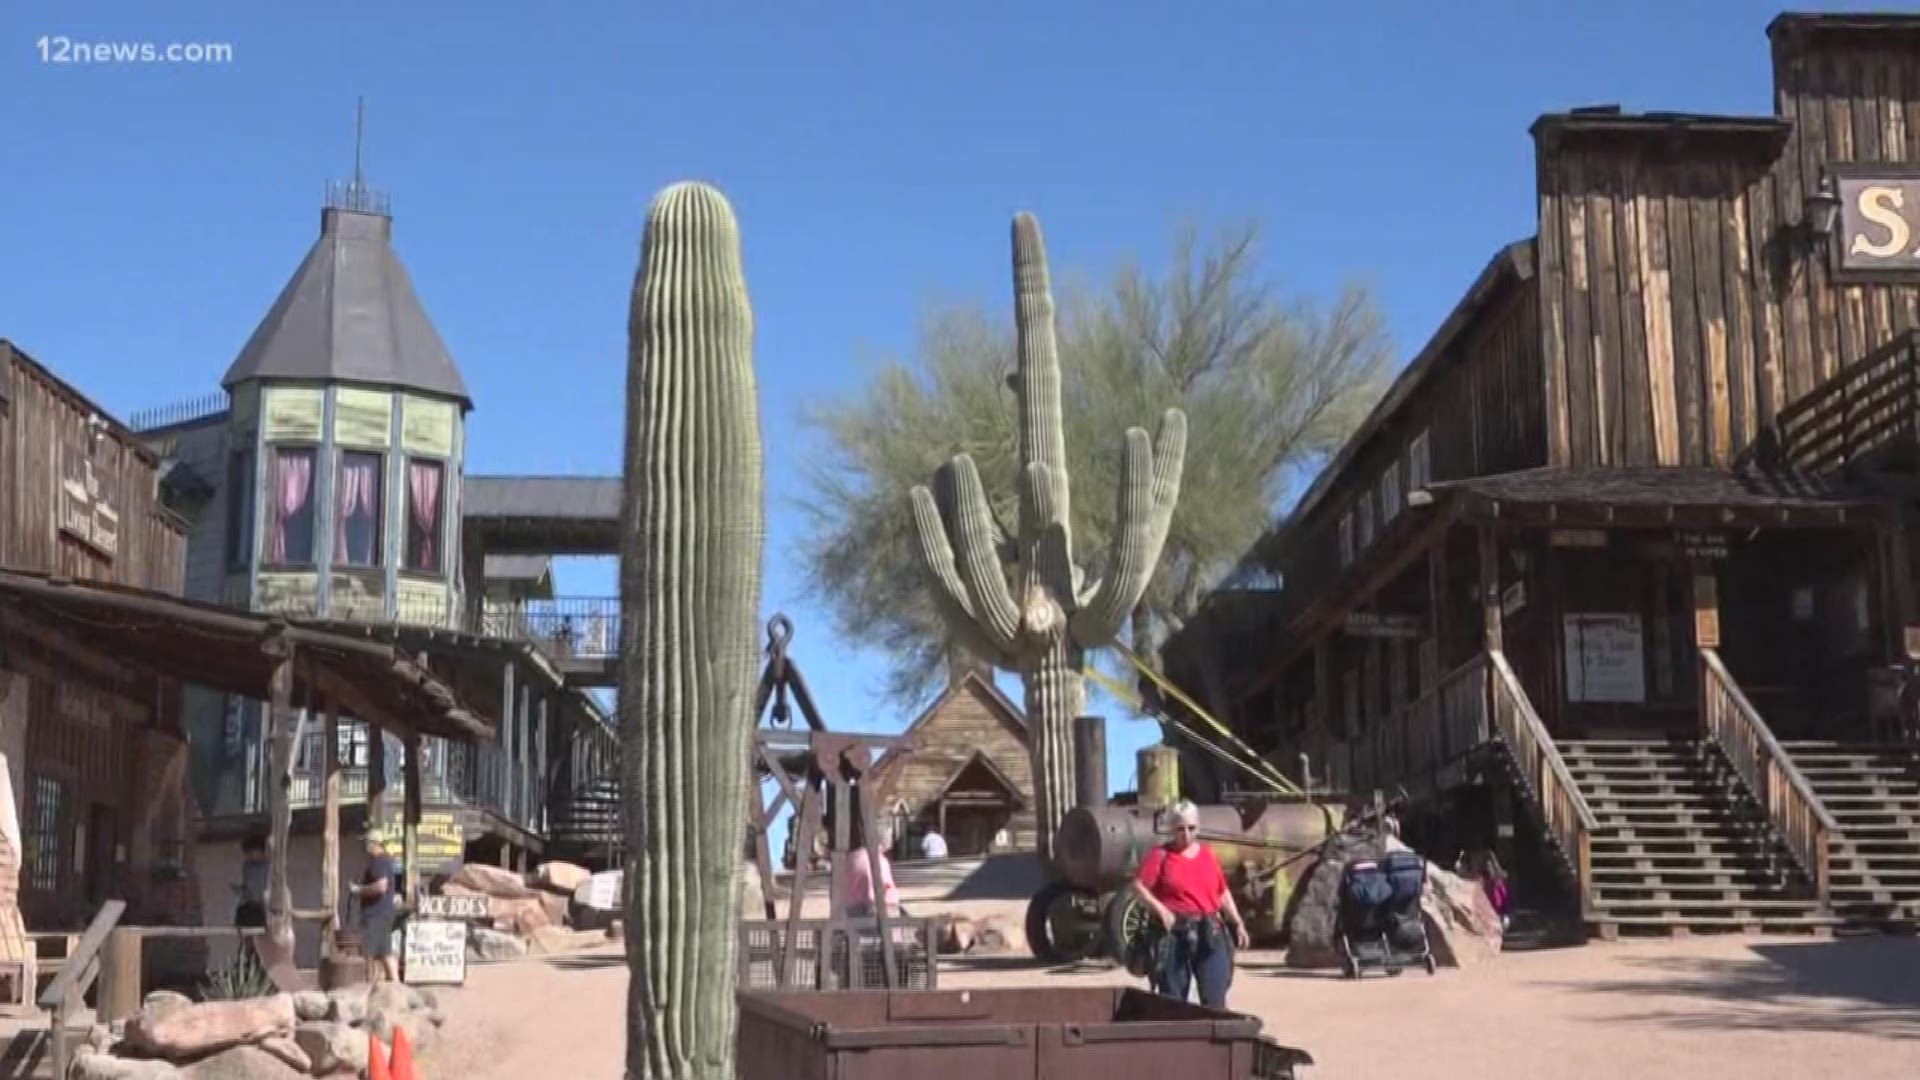 Ghost hunting and the Cactus League go together, right? Well, if you want to explore the spooky side of the Valley after watching some incredible baseball check out Goldfield Ghosttown.